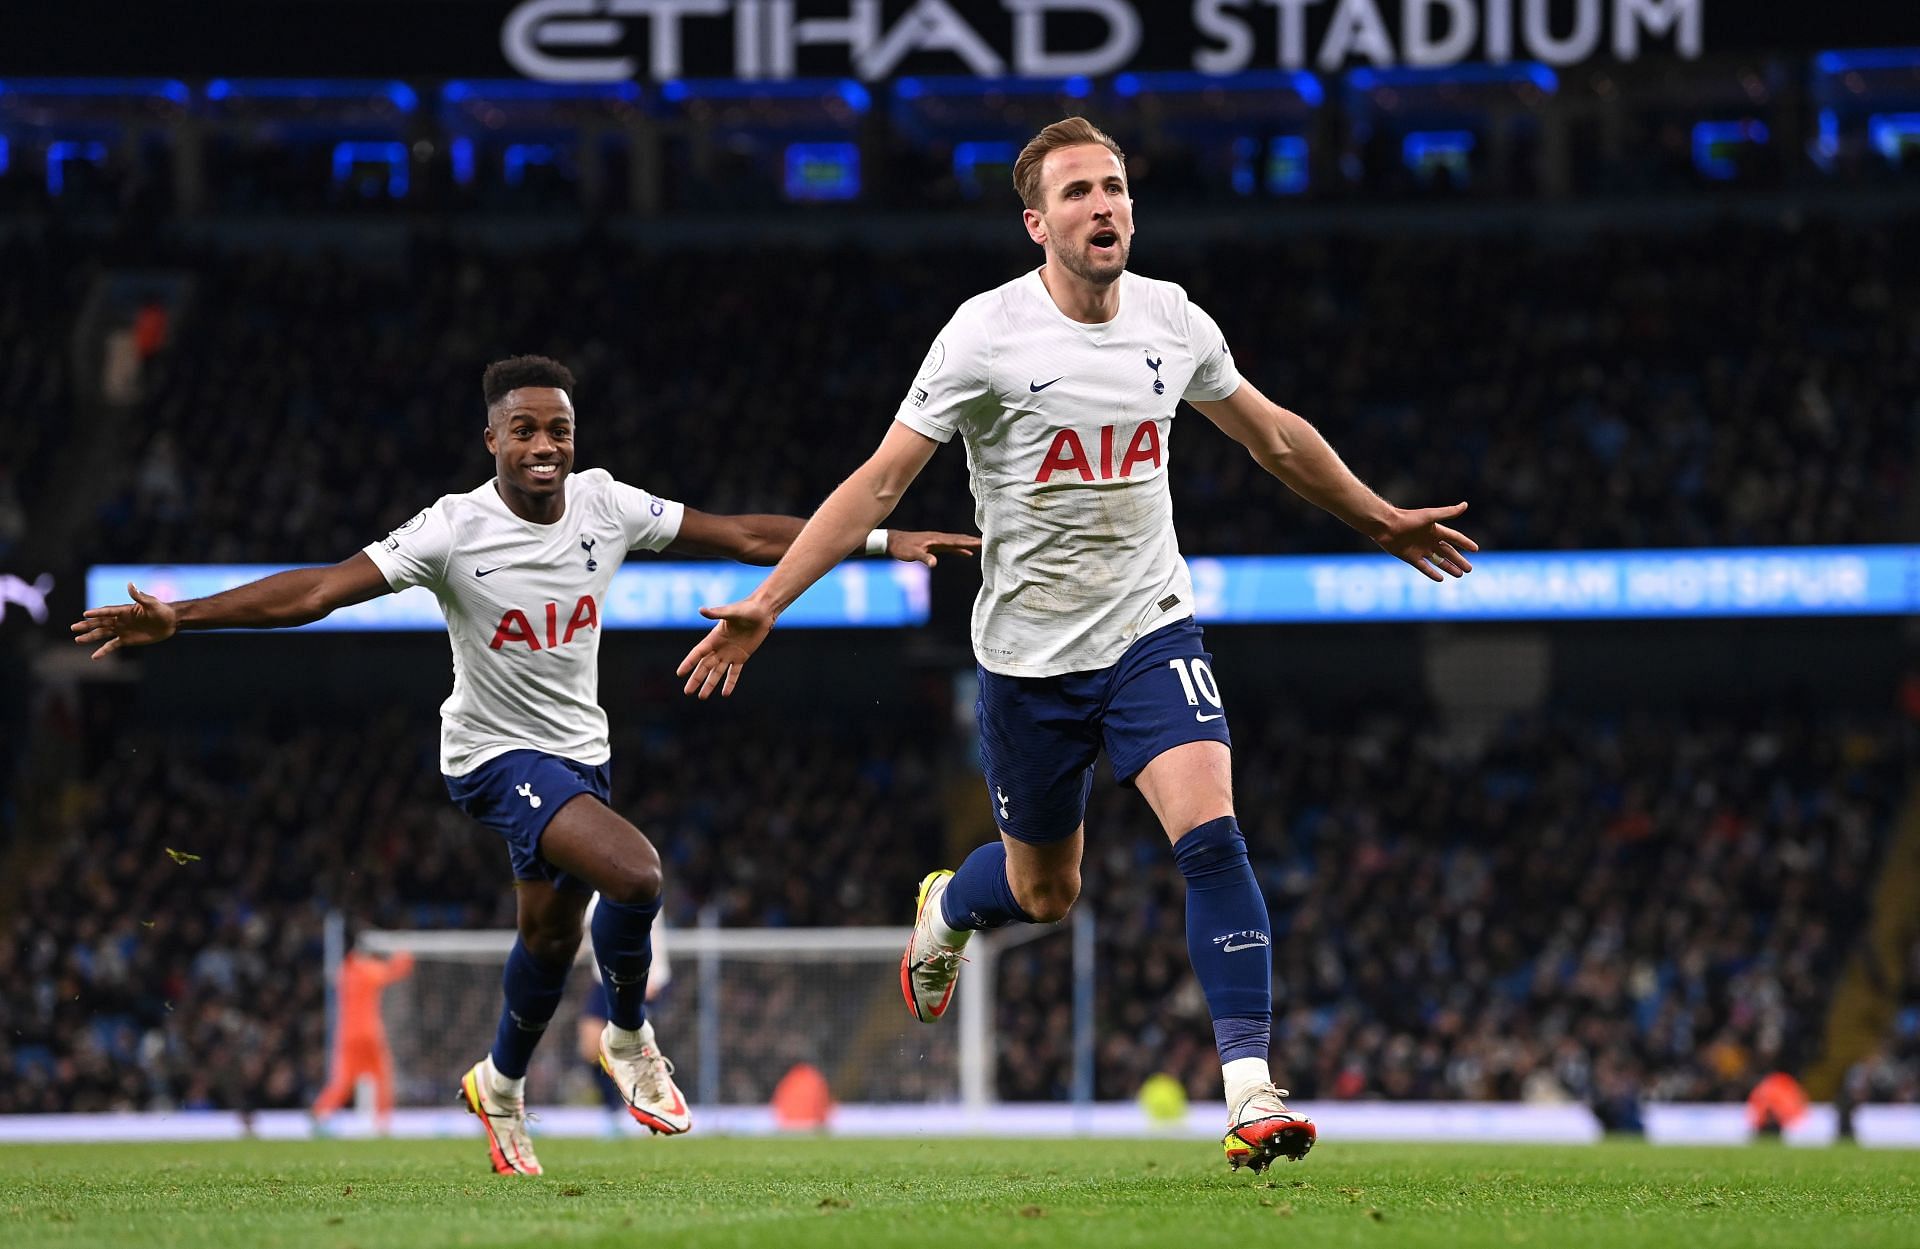 Antonio Conte will be looking to keep Harry Kane for the next season as he already has 15 goal contributions this year